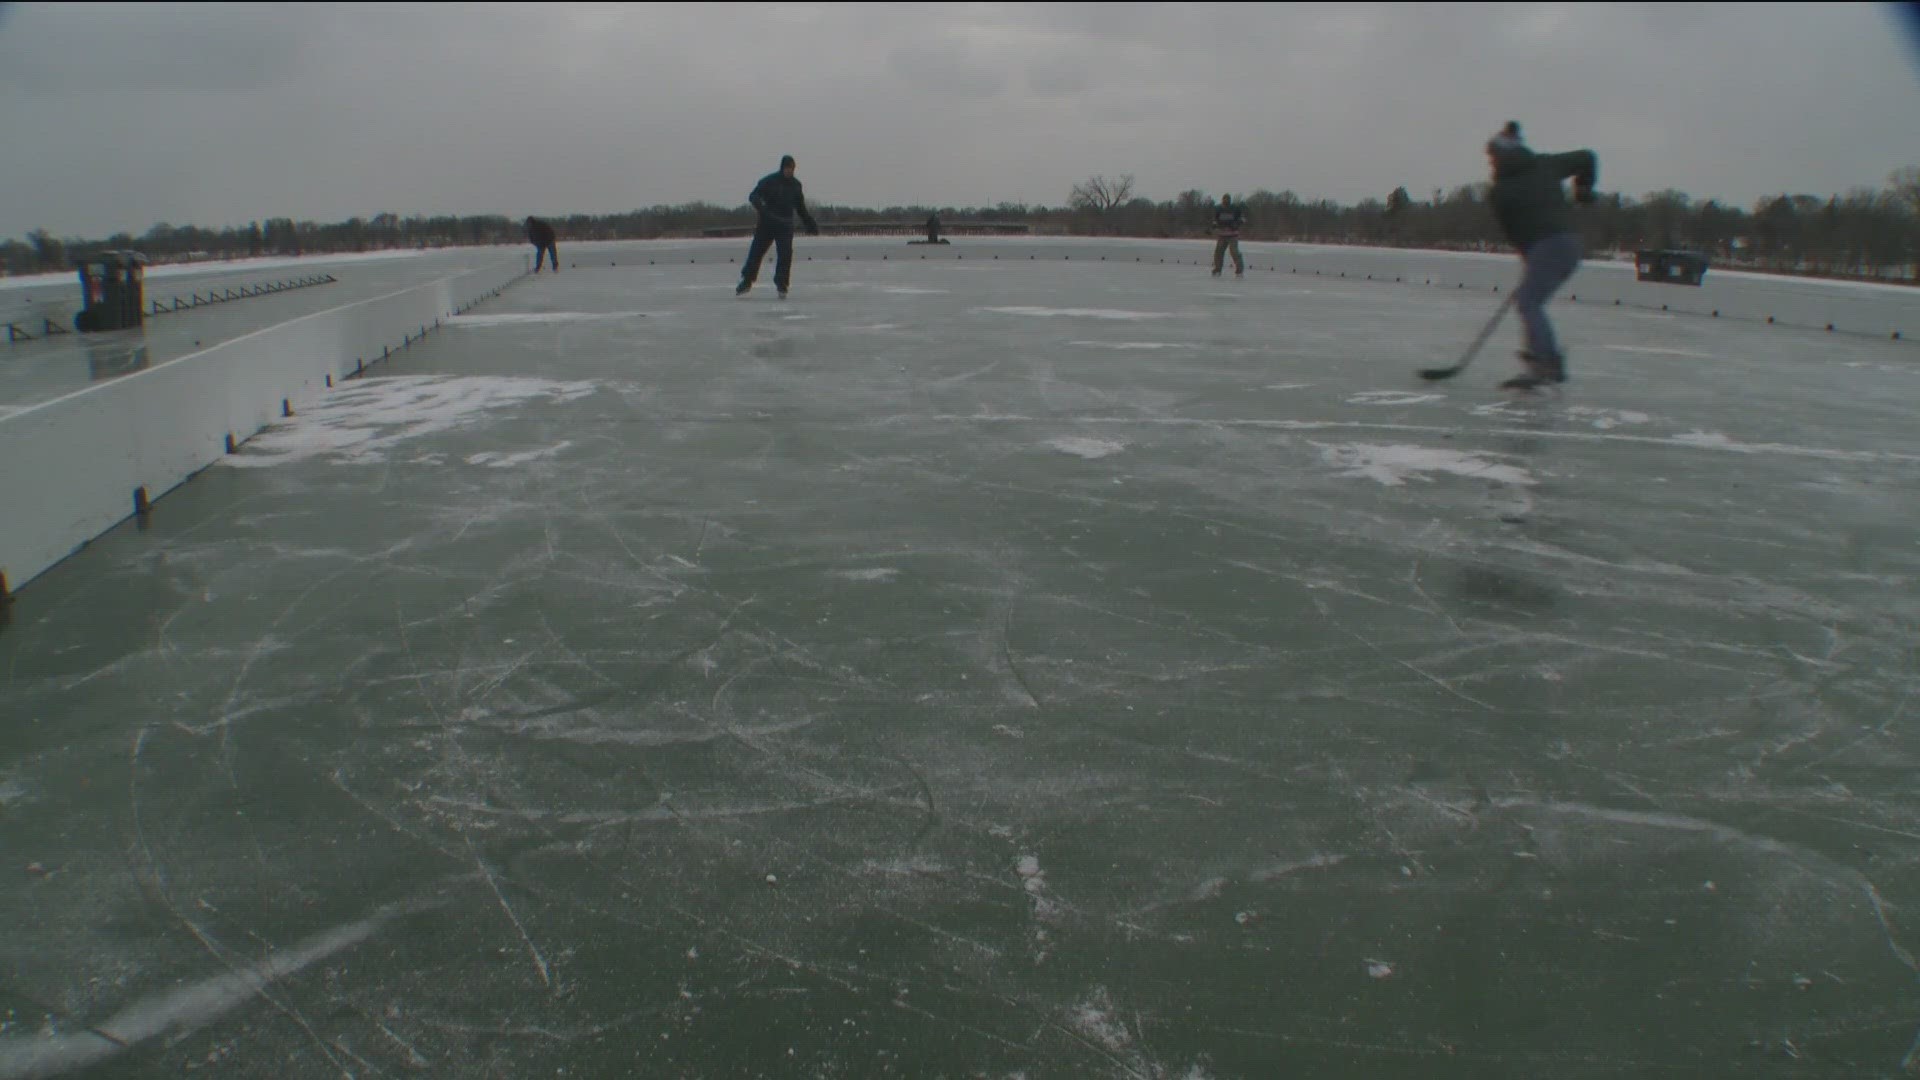 After weeks of freezing temperatures, the ice on Lake Nokomis is thick enough for the competition to start Jan. 19.